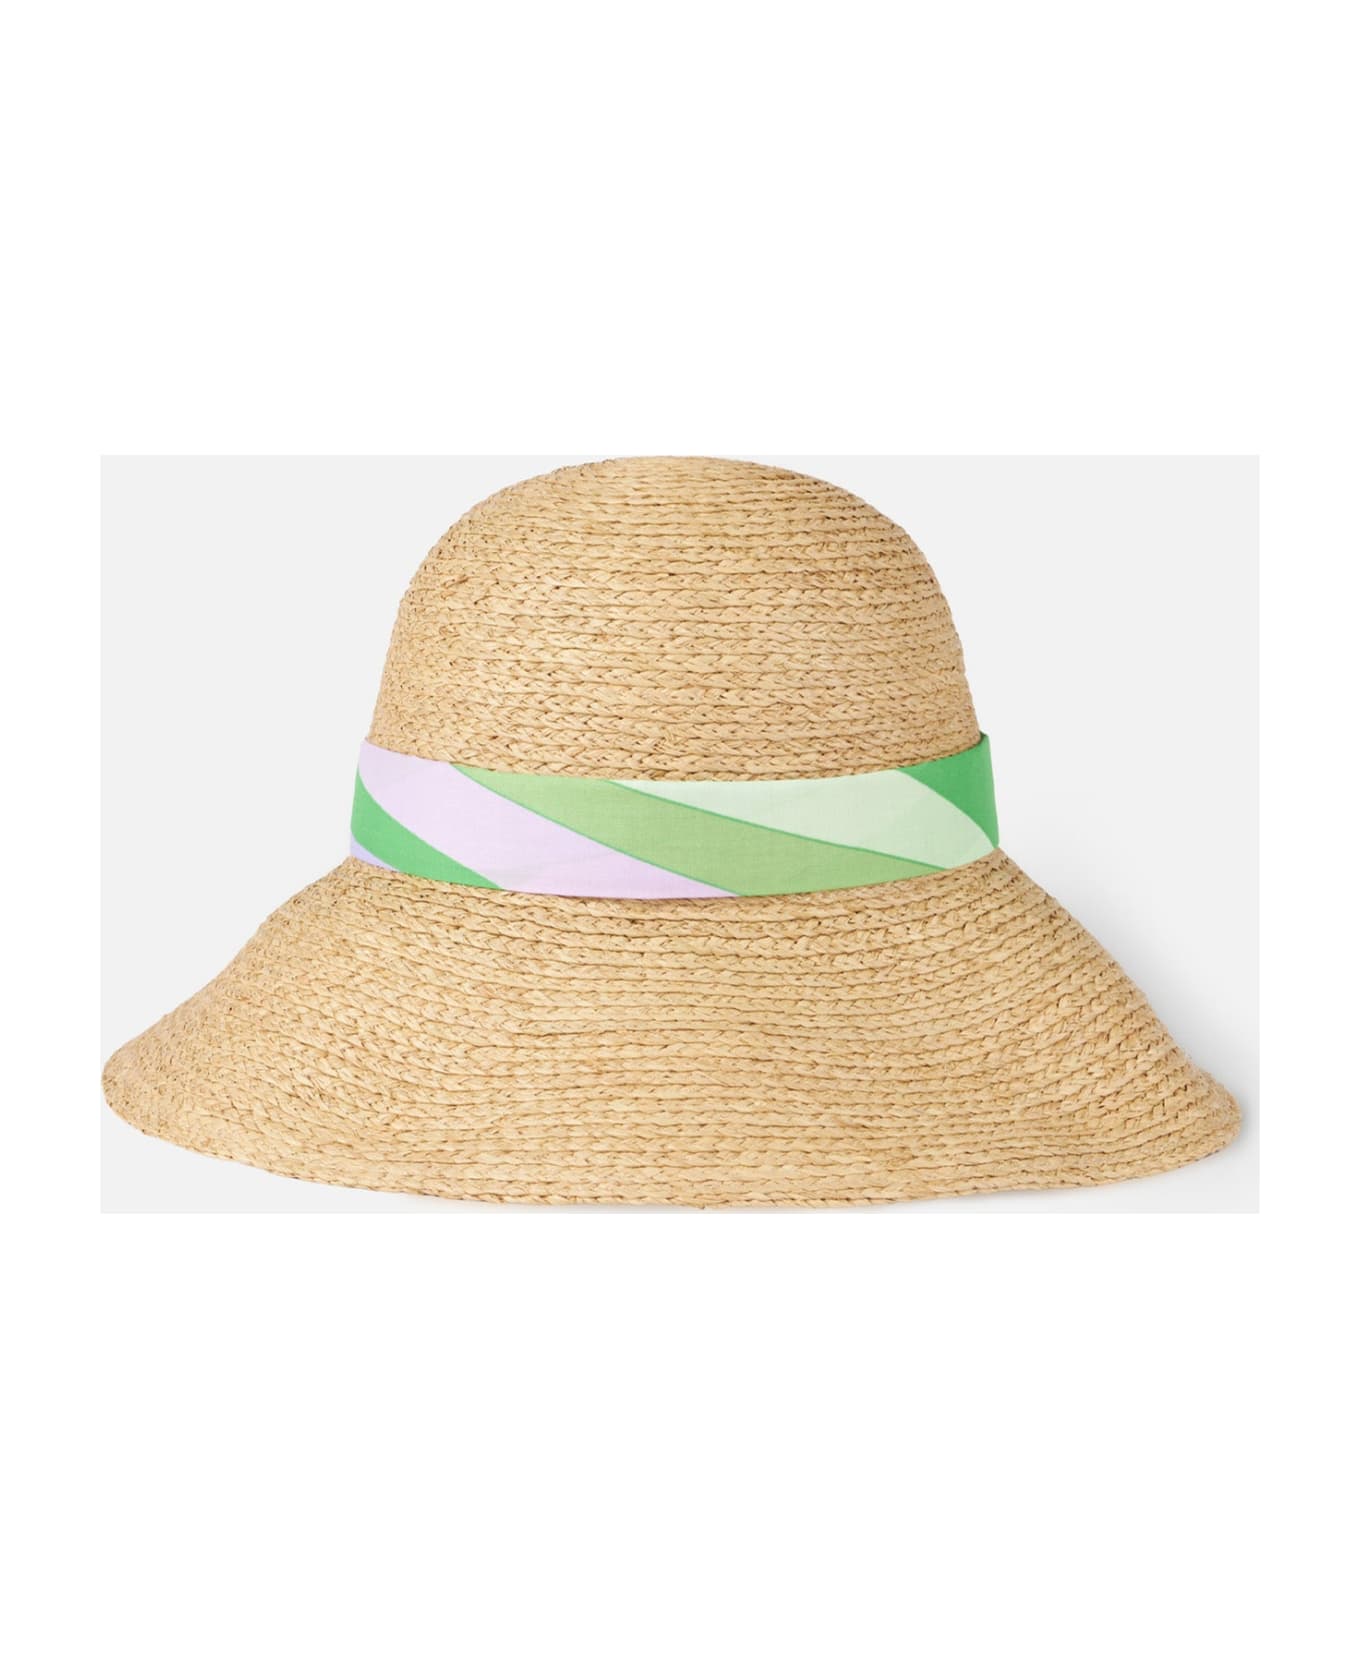 MC2 Saint Barth Woman Straw Bucket With Front Embroidery And Multicolor Printed Stripe - WHITE